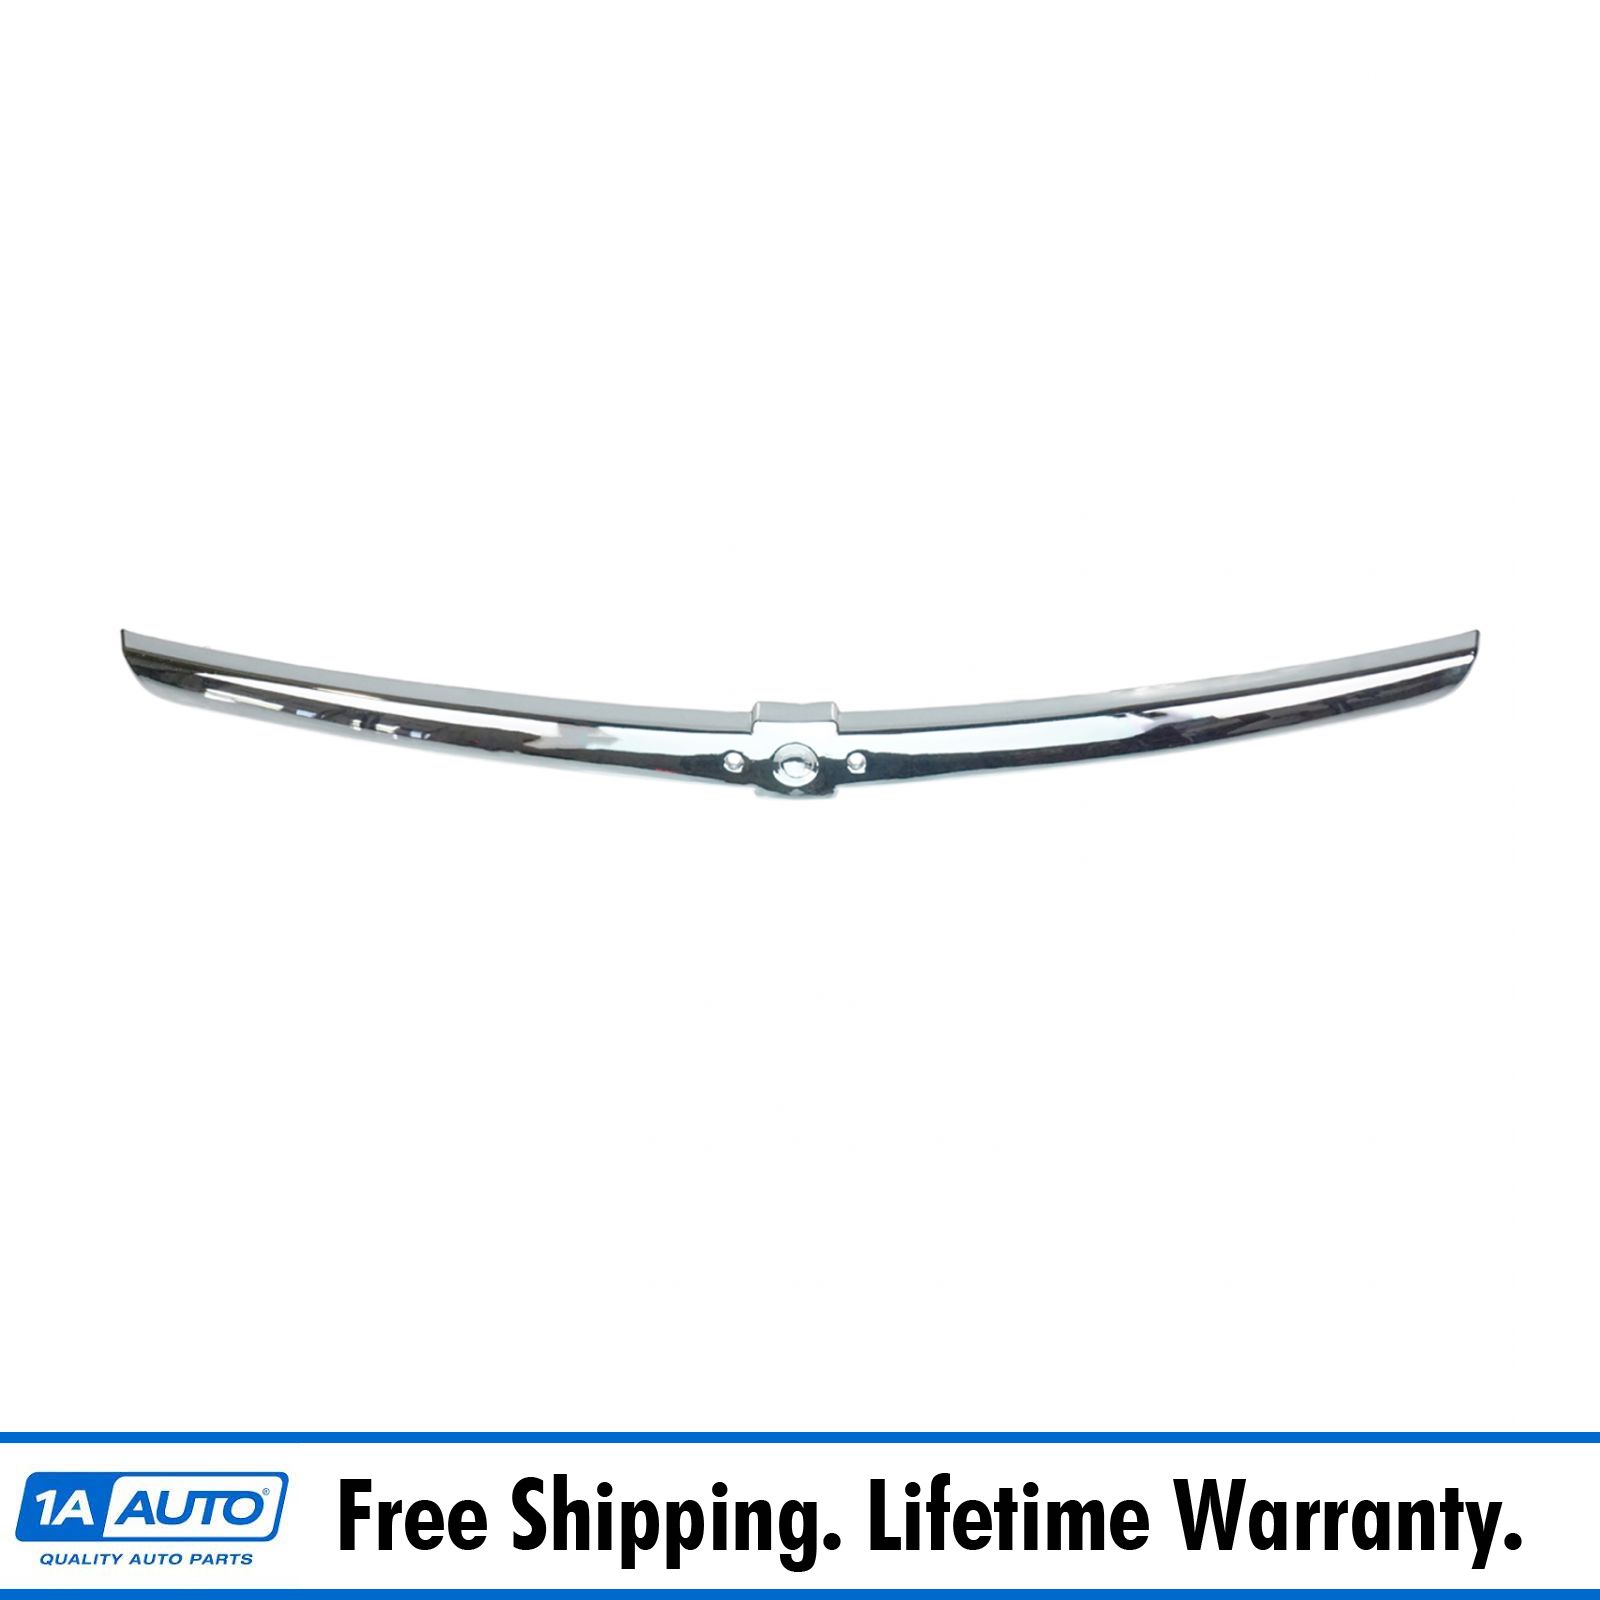 GRILLE MOLDING CHROME FRONT FOR 2000 2005 CHEVROLET CLASSIC MALIBU GM1210102